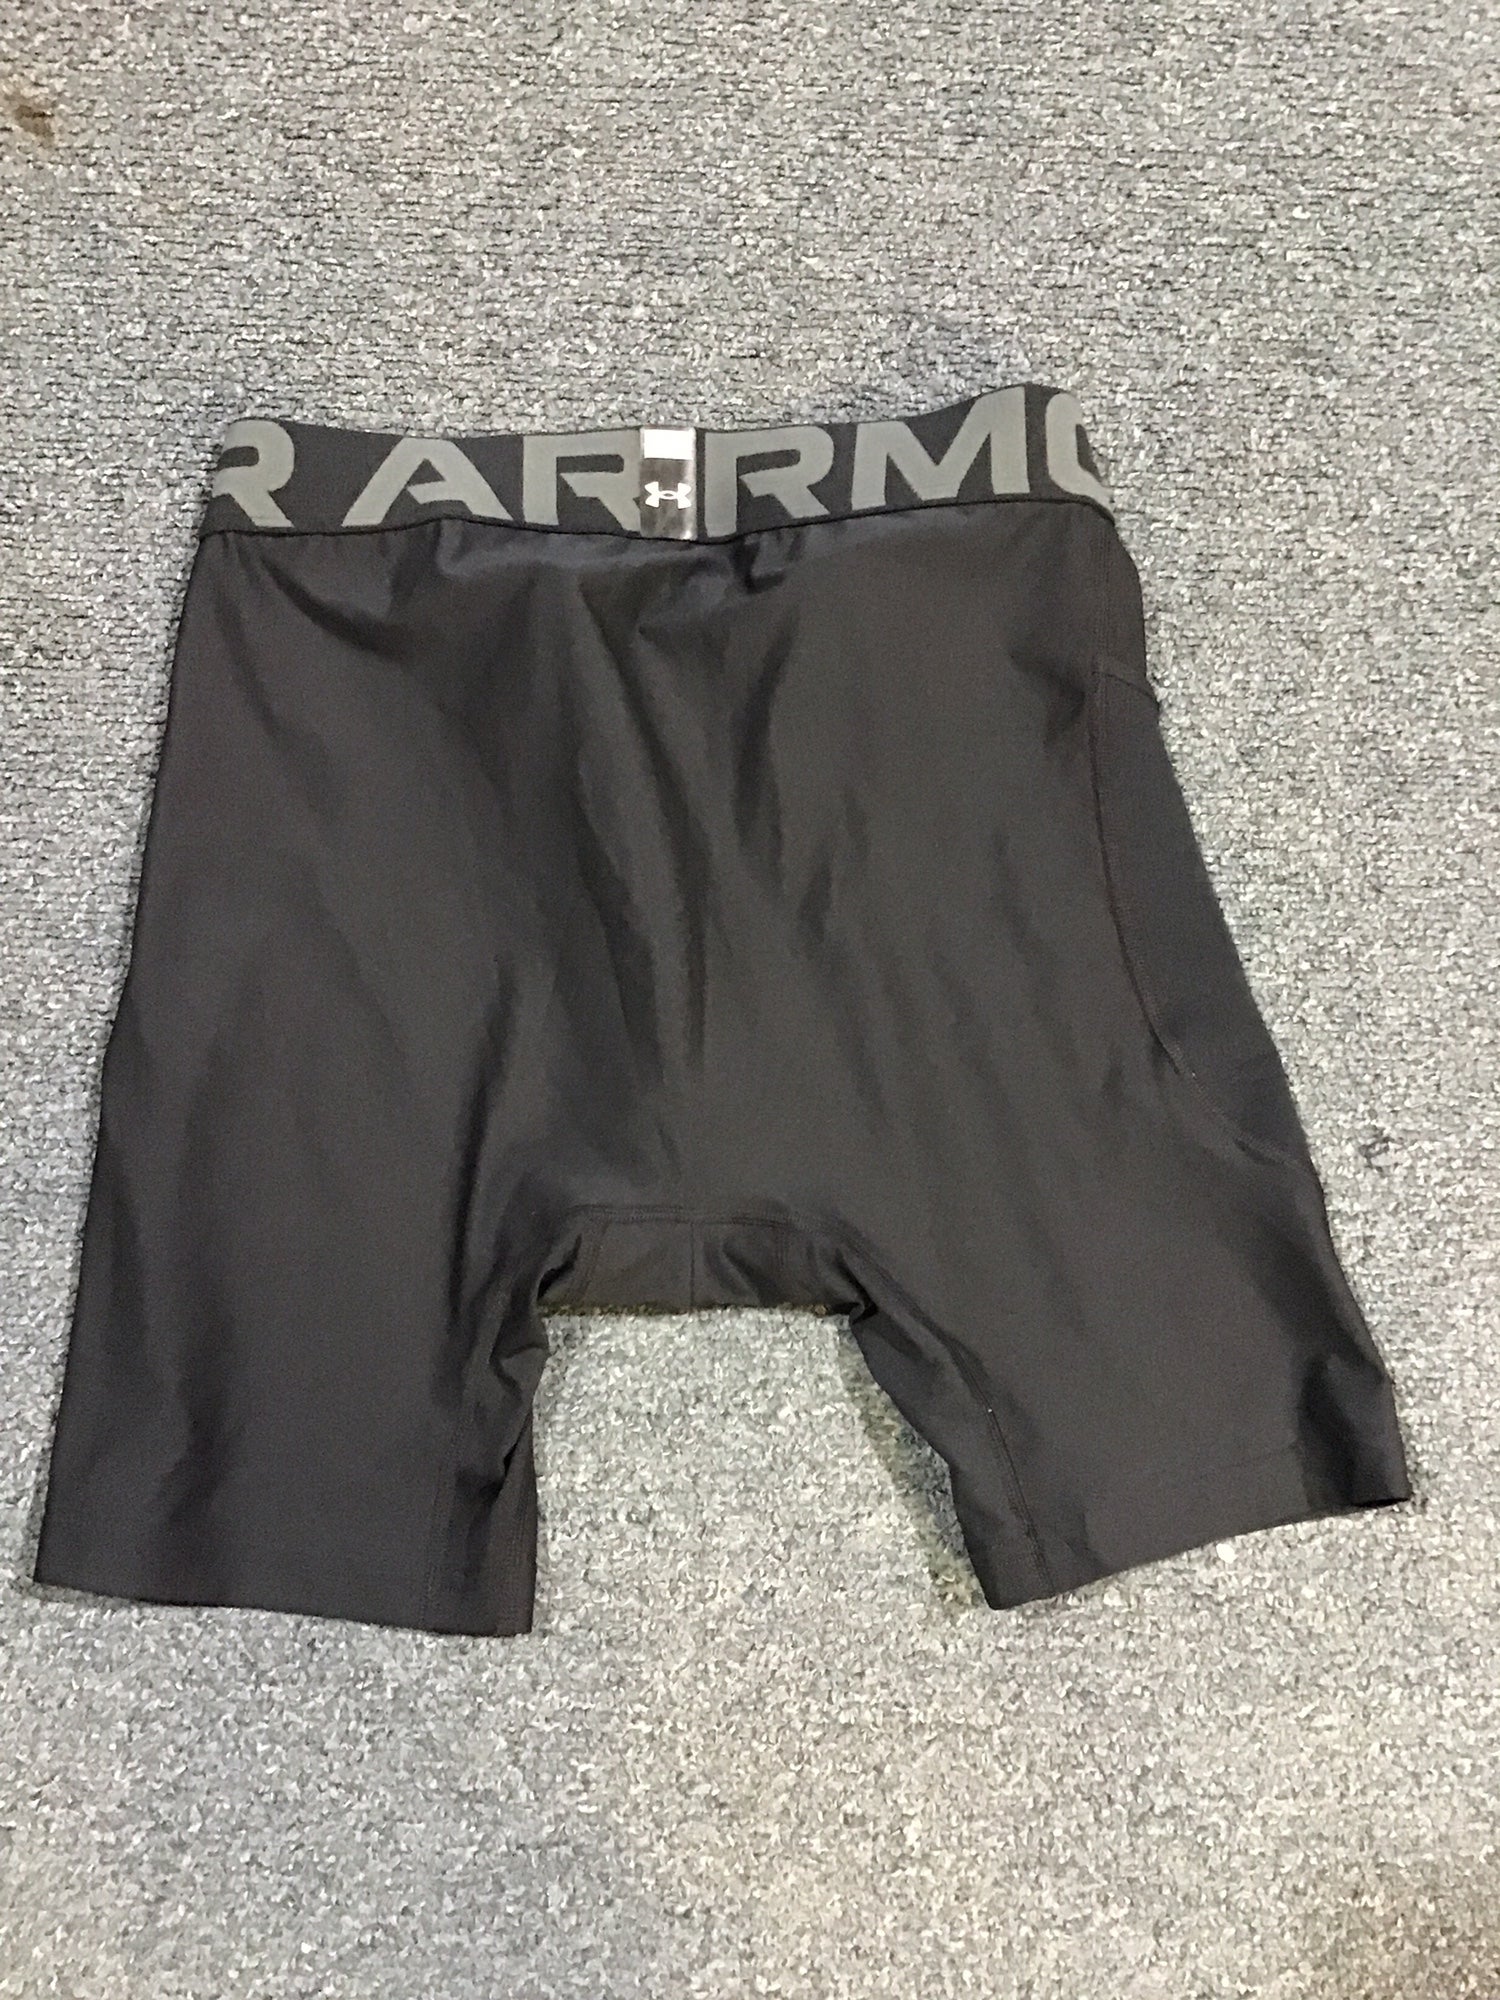 New Black Under Armour Compression Shorts W/ Side Pockets Large